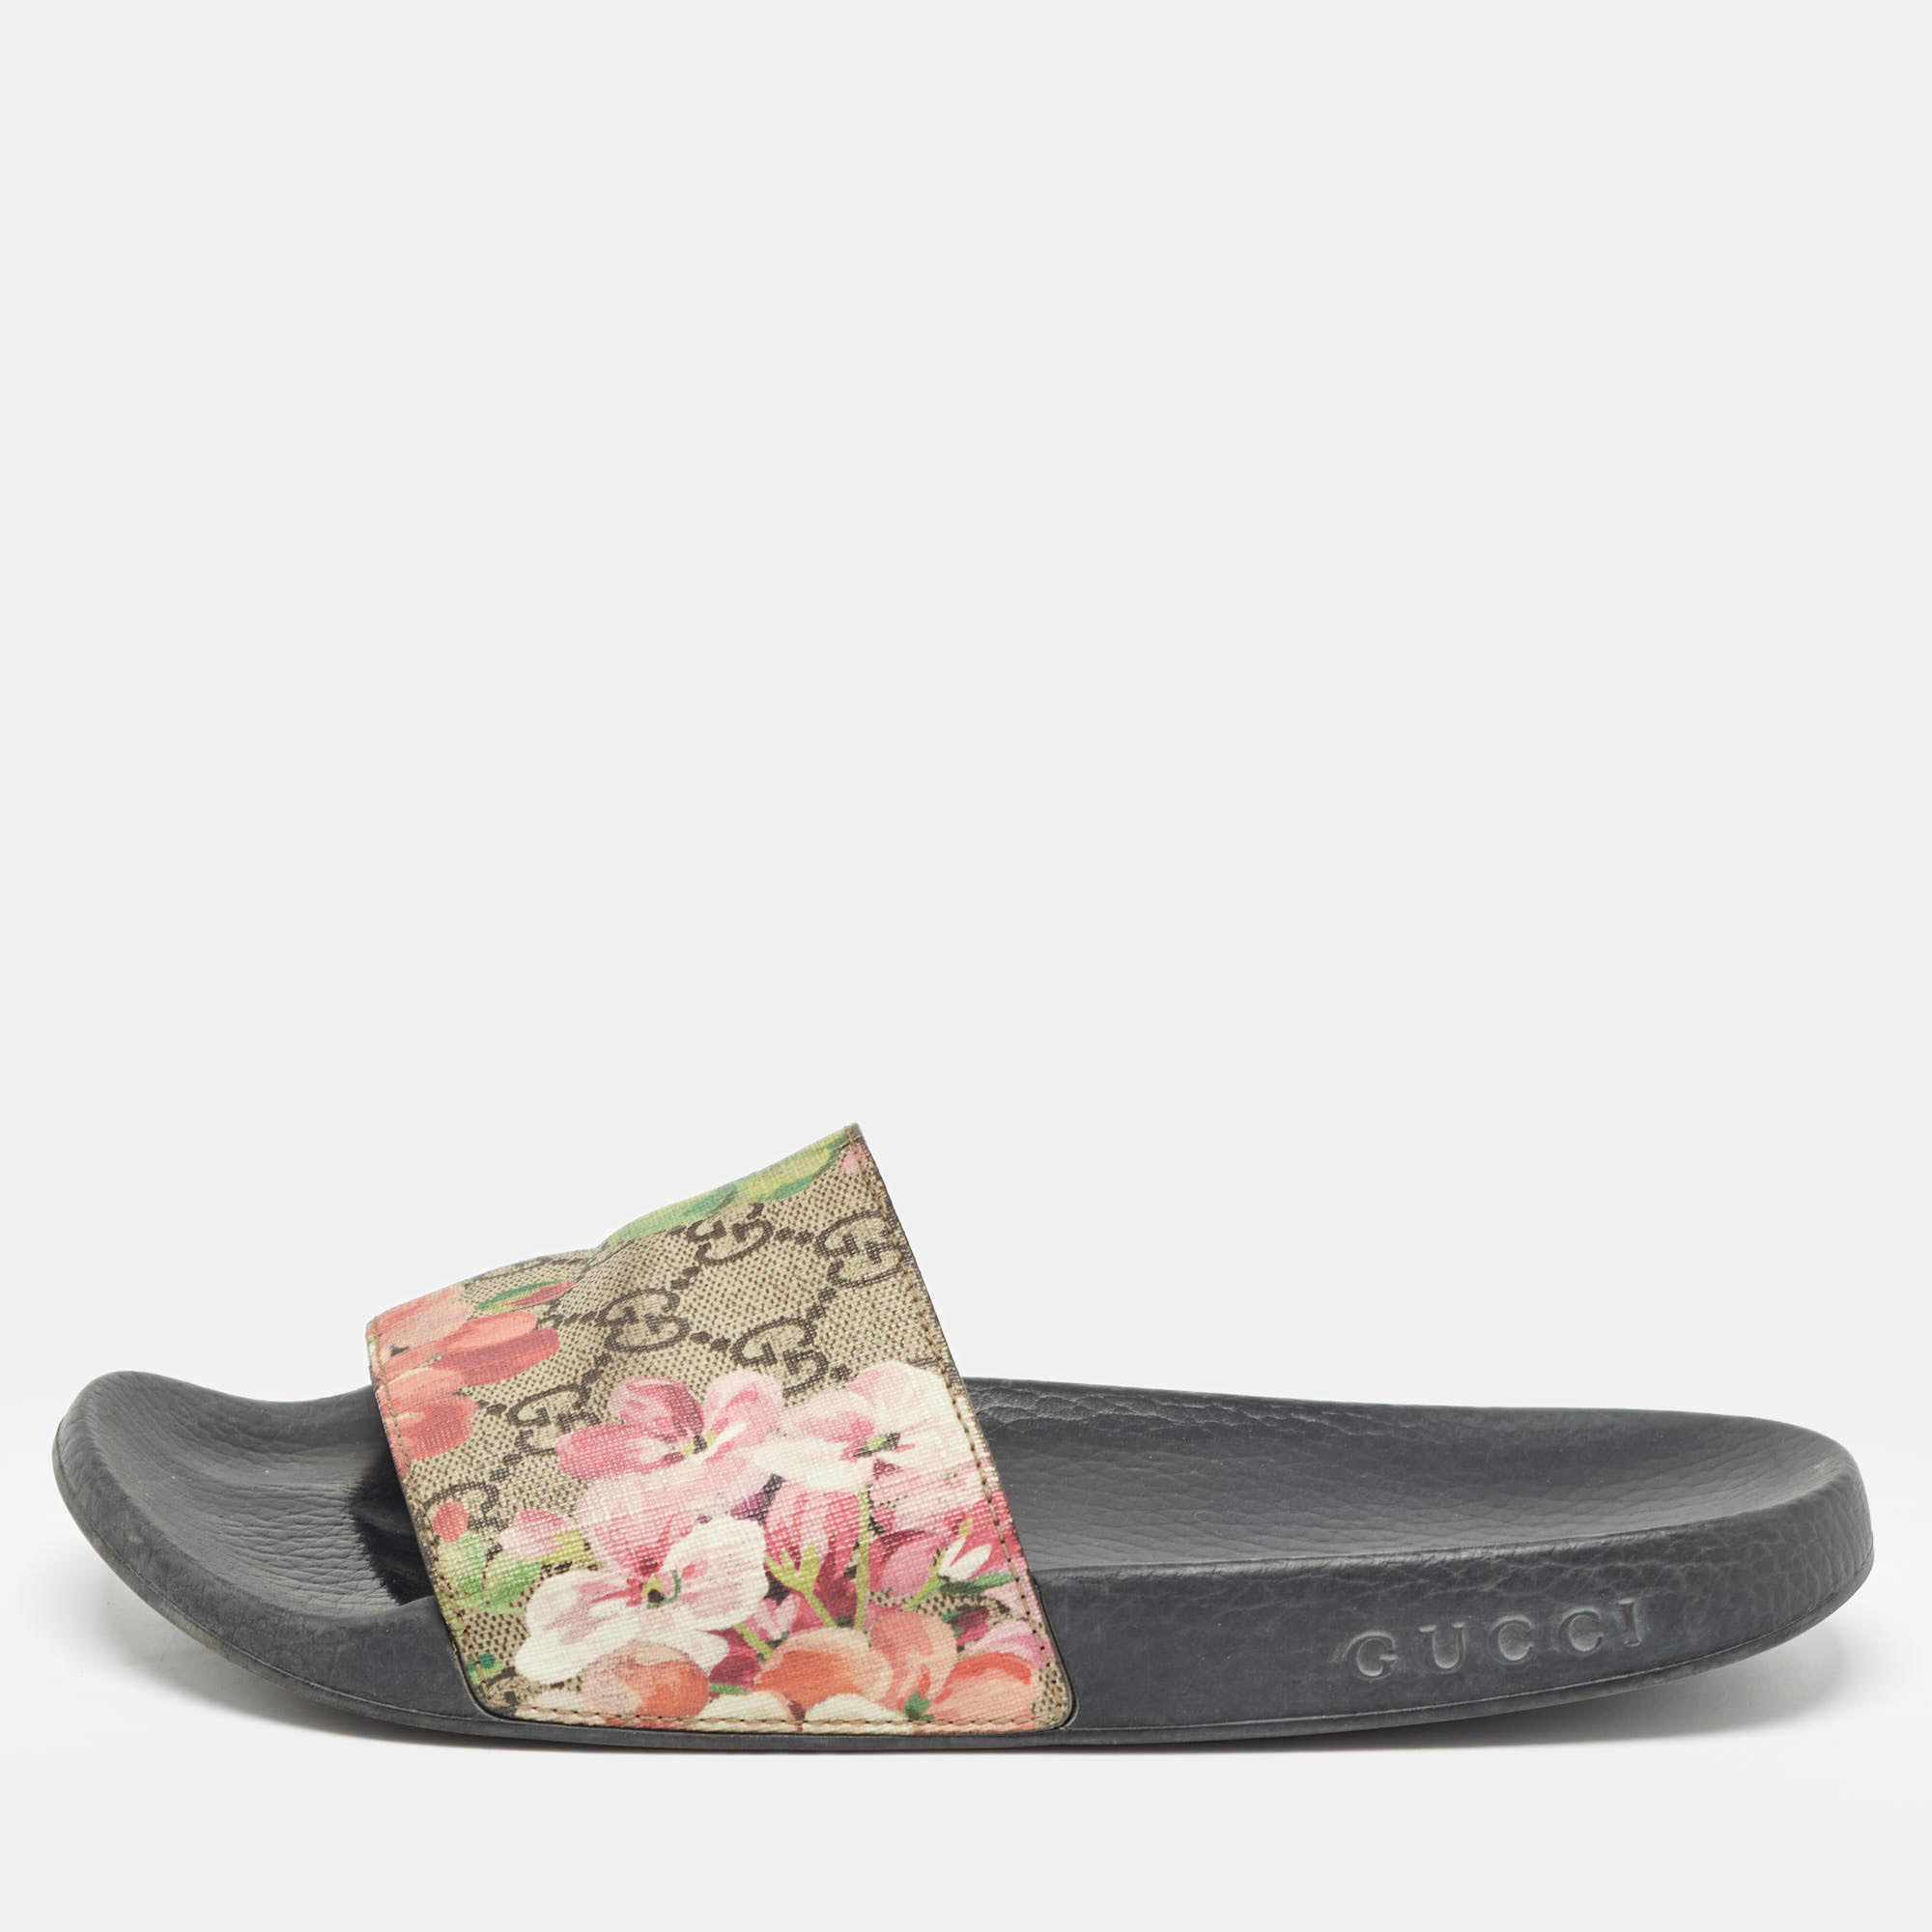 Pre-owned Gucci Gg Multicolor Canvas Floral Slide Flats Size 39